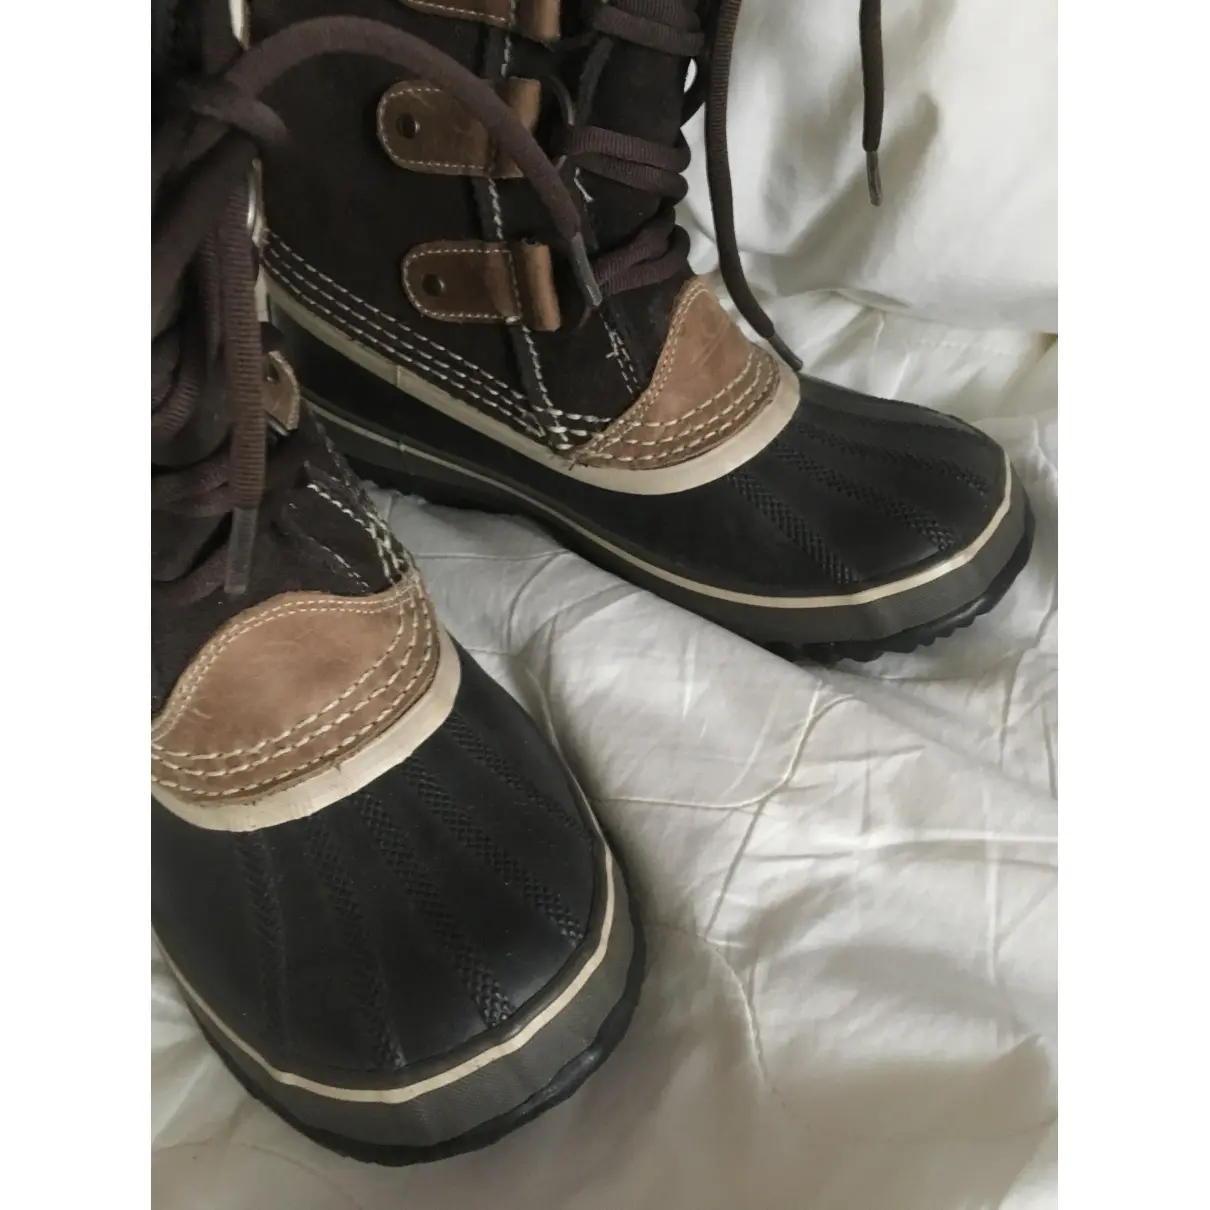 Buy Sorel Leather snow boots online